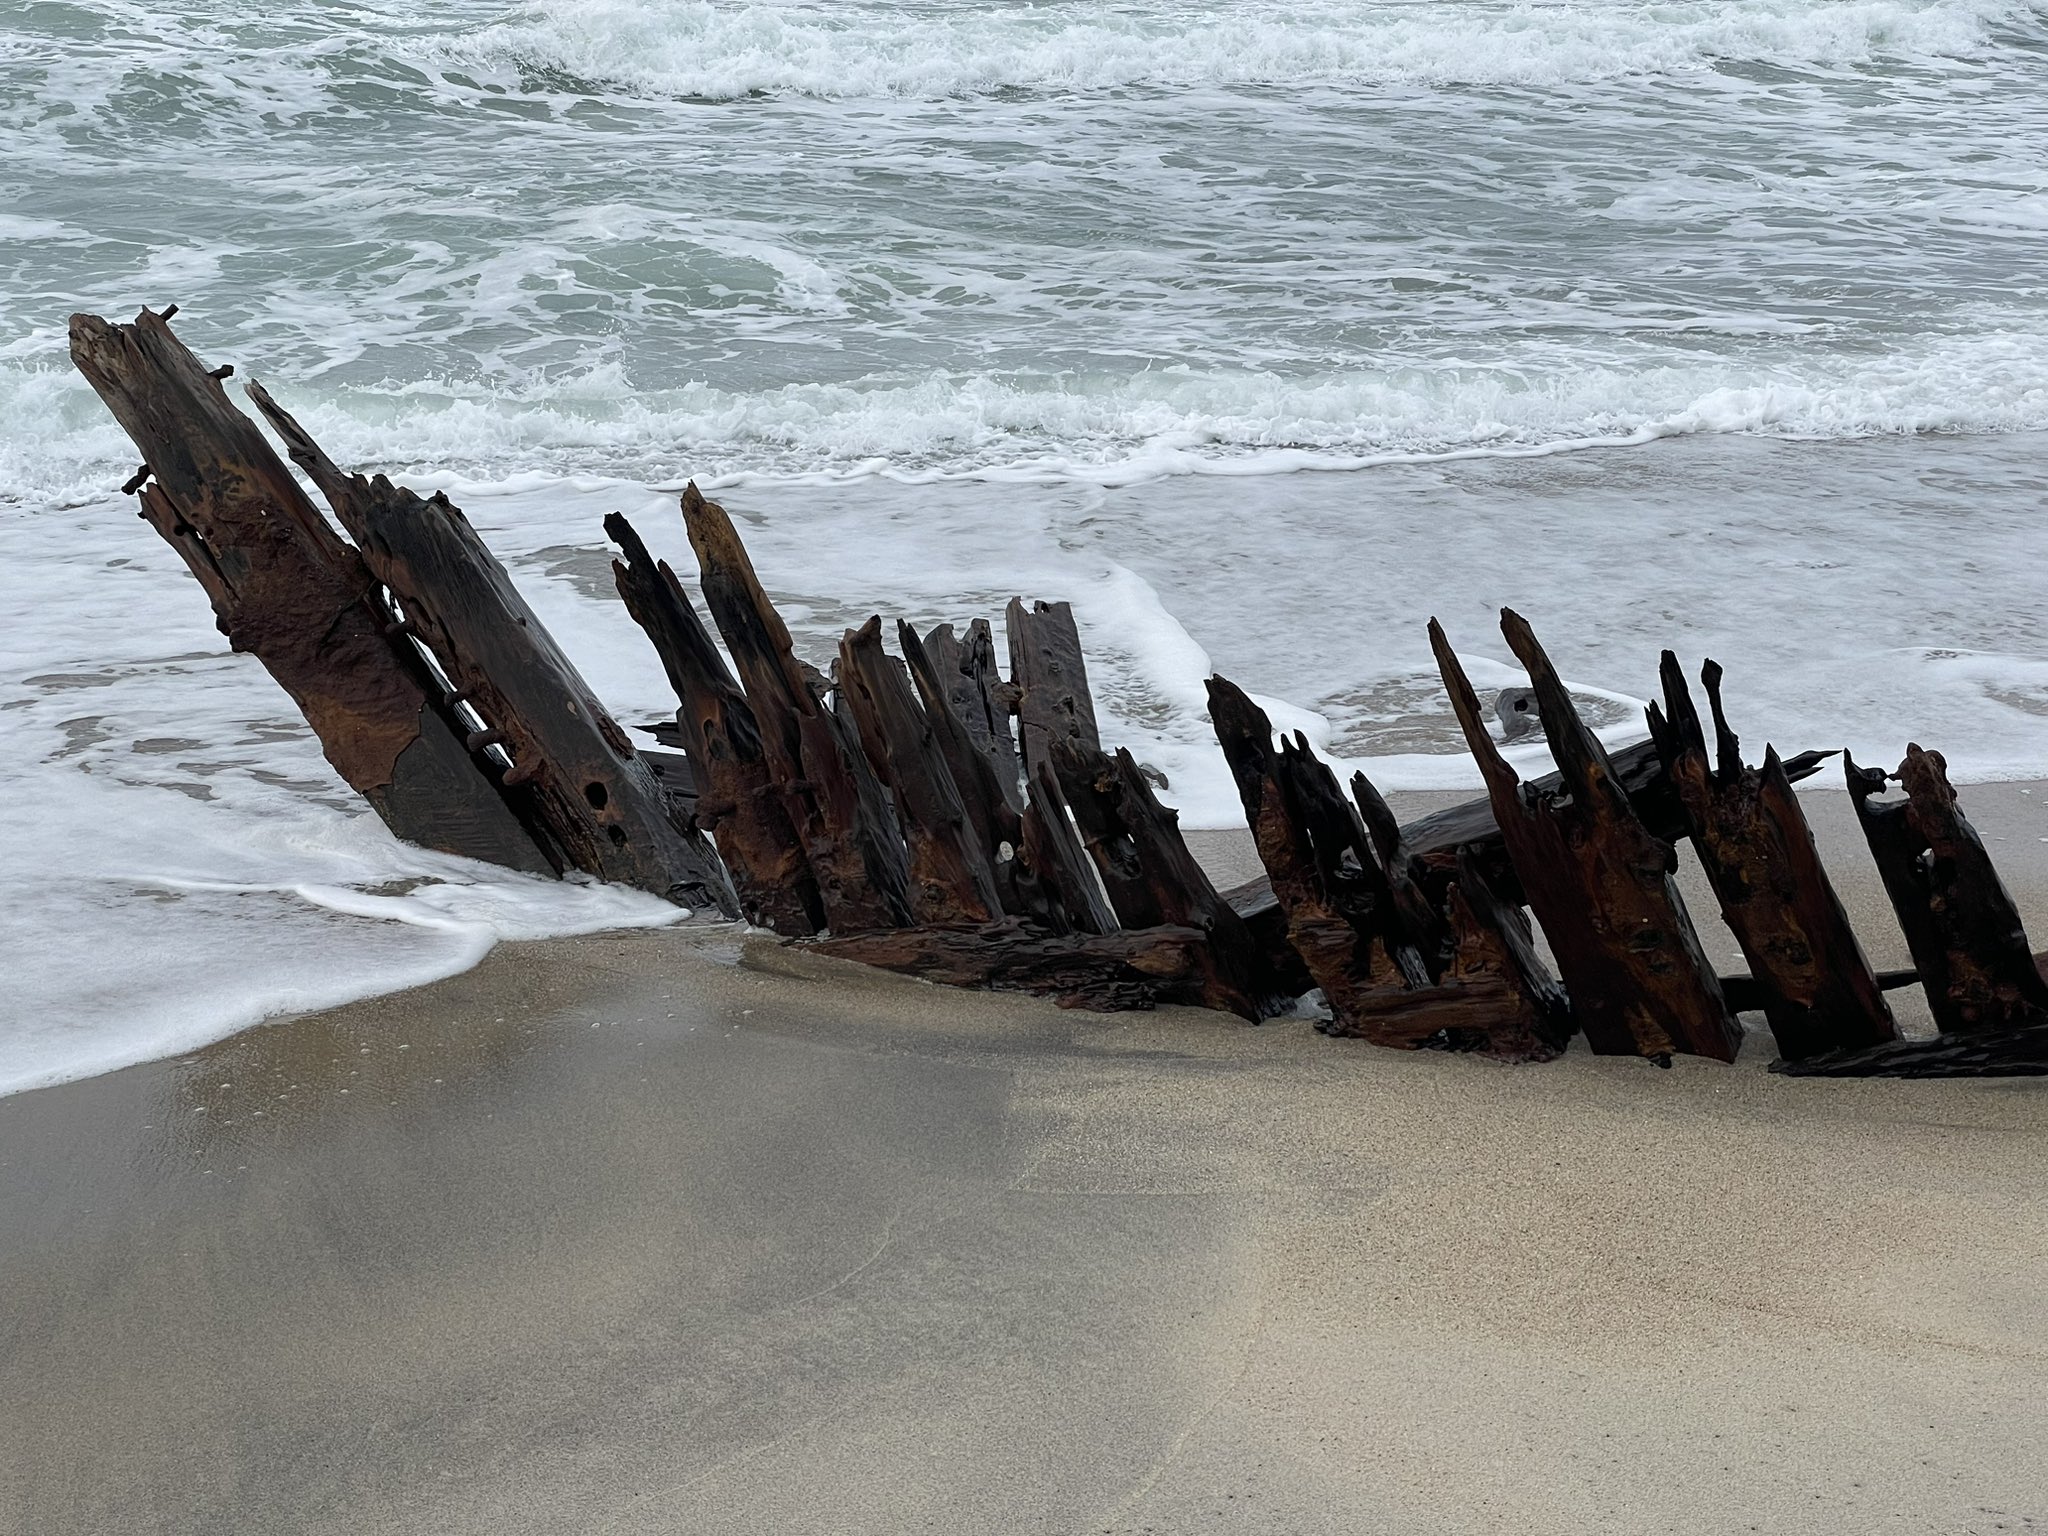 Remains of 1884 shipwreck discovered on Massachusetts beach